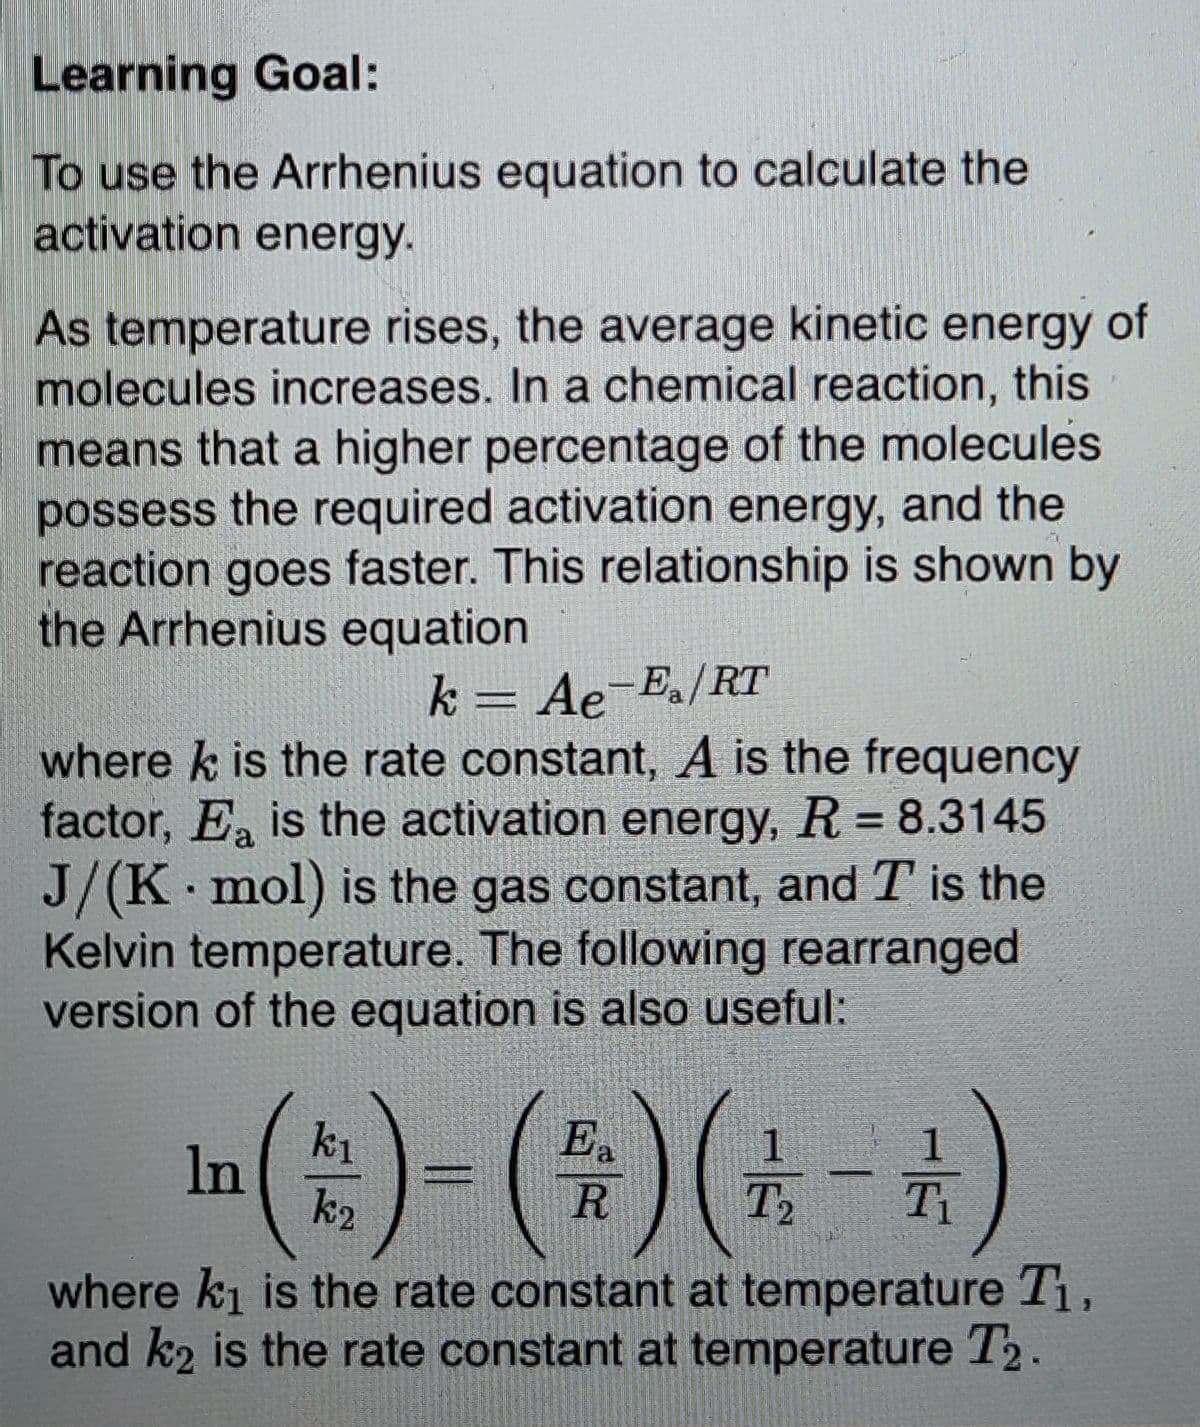 Learning Goal:
To use the Arrhenius equation to calculate the
activation energy.
As temperature rises, the average kinetic energy of
molecules increases. In a chemical reaction, this
means that a higher percentage of the molecules
possess the required activation energy, and the
reaction goes faster. This relationship is shown by
the Arrhenius equation
k = Ae E./RT
where k is the rate constant, A is the frequency
factor, E is the activation energy, R = 8.3145
J/(K mol) is the gas constant, and T is the
Kelvin temperature. The following rearranged
version of the equation is also useful:
k1
In
E.
R
T2
where ki is the rate constant at temperature T1,
and k2 is the rate constant at temperature T2.
